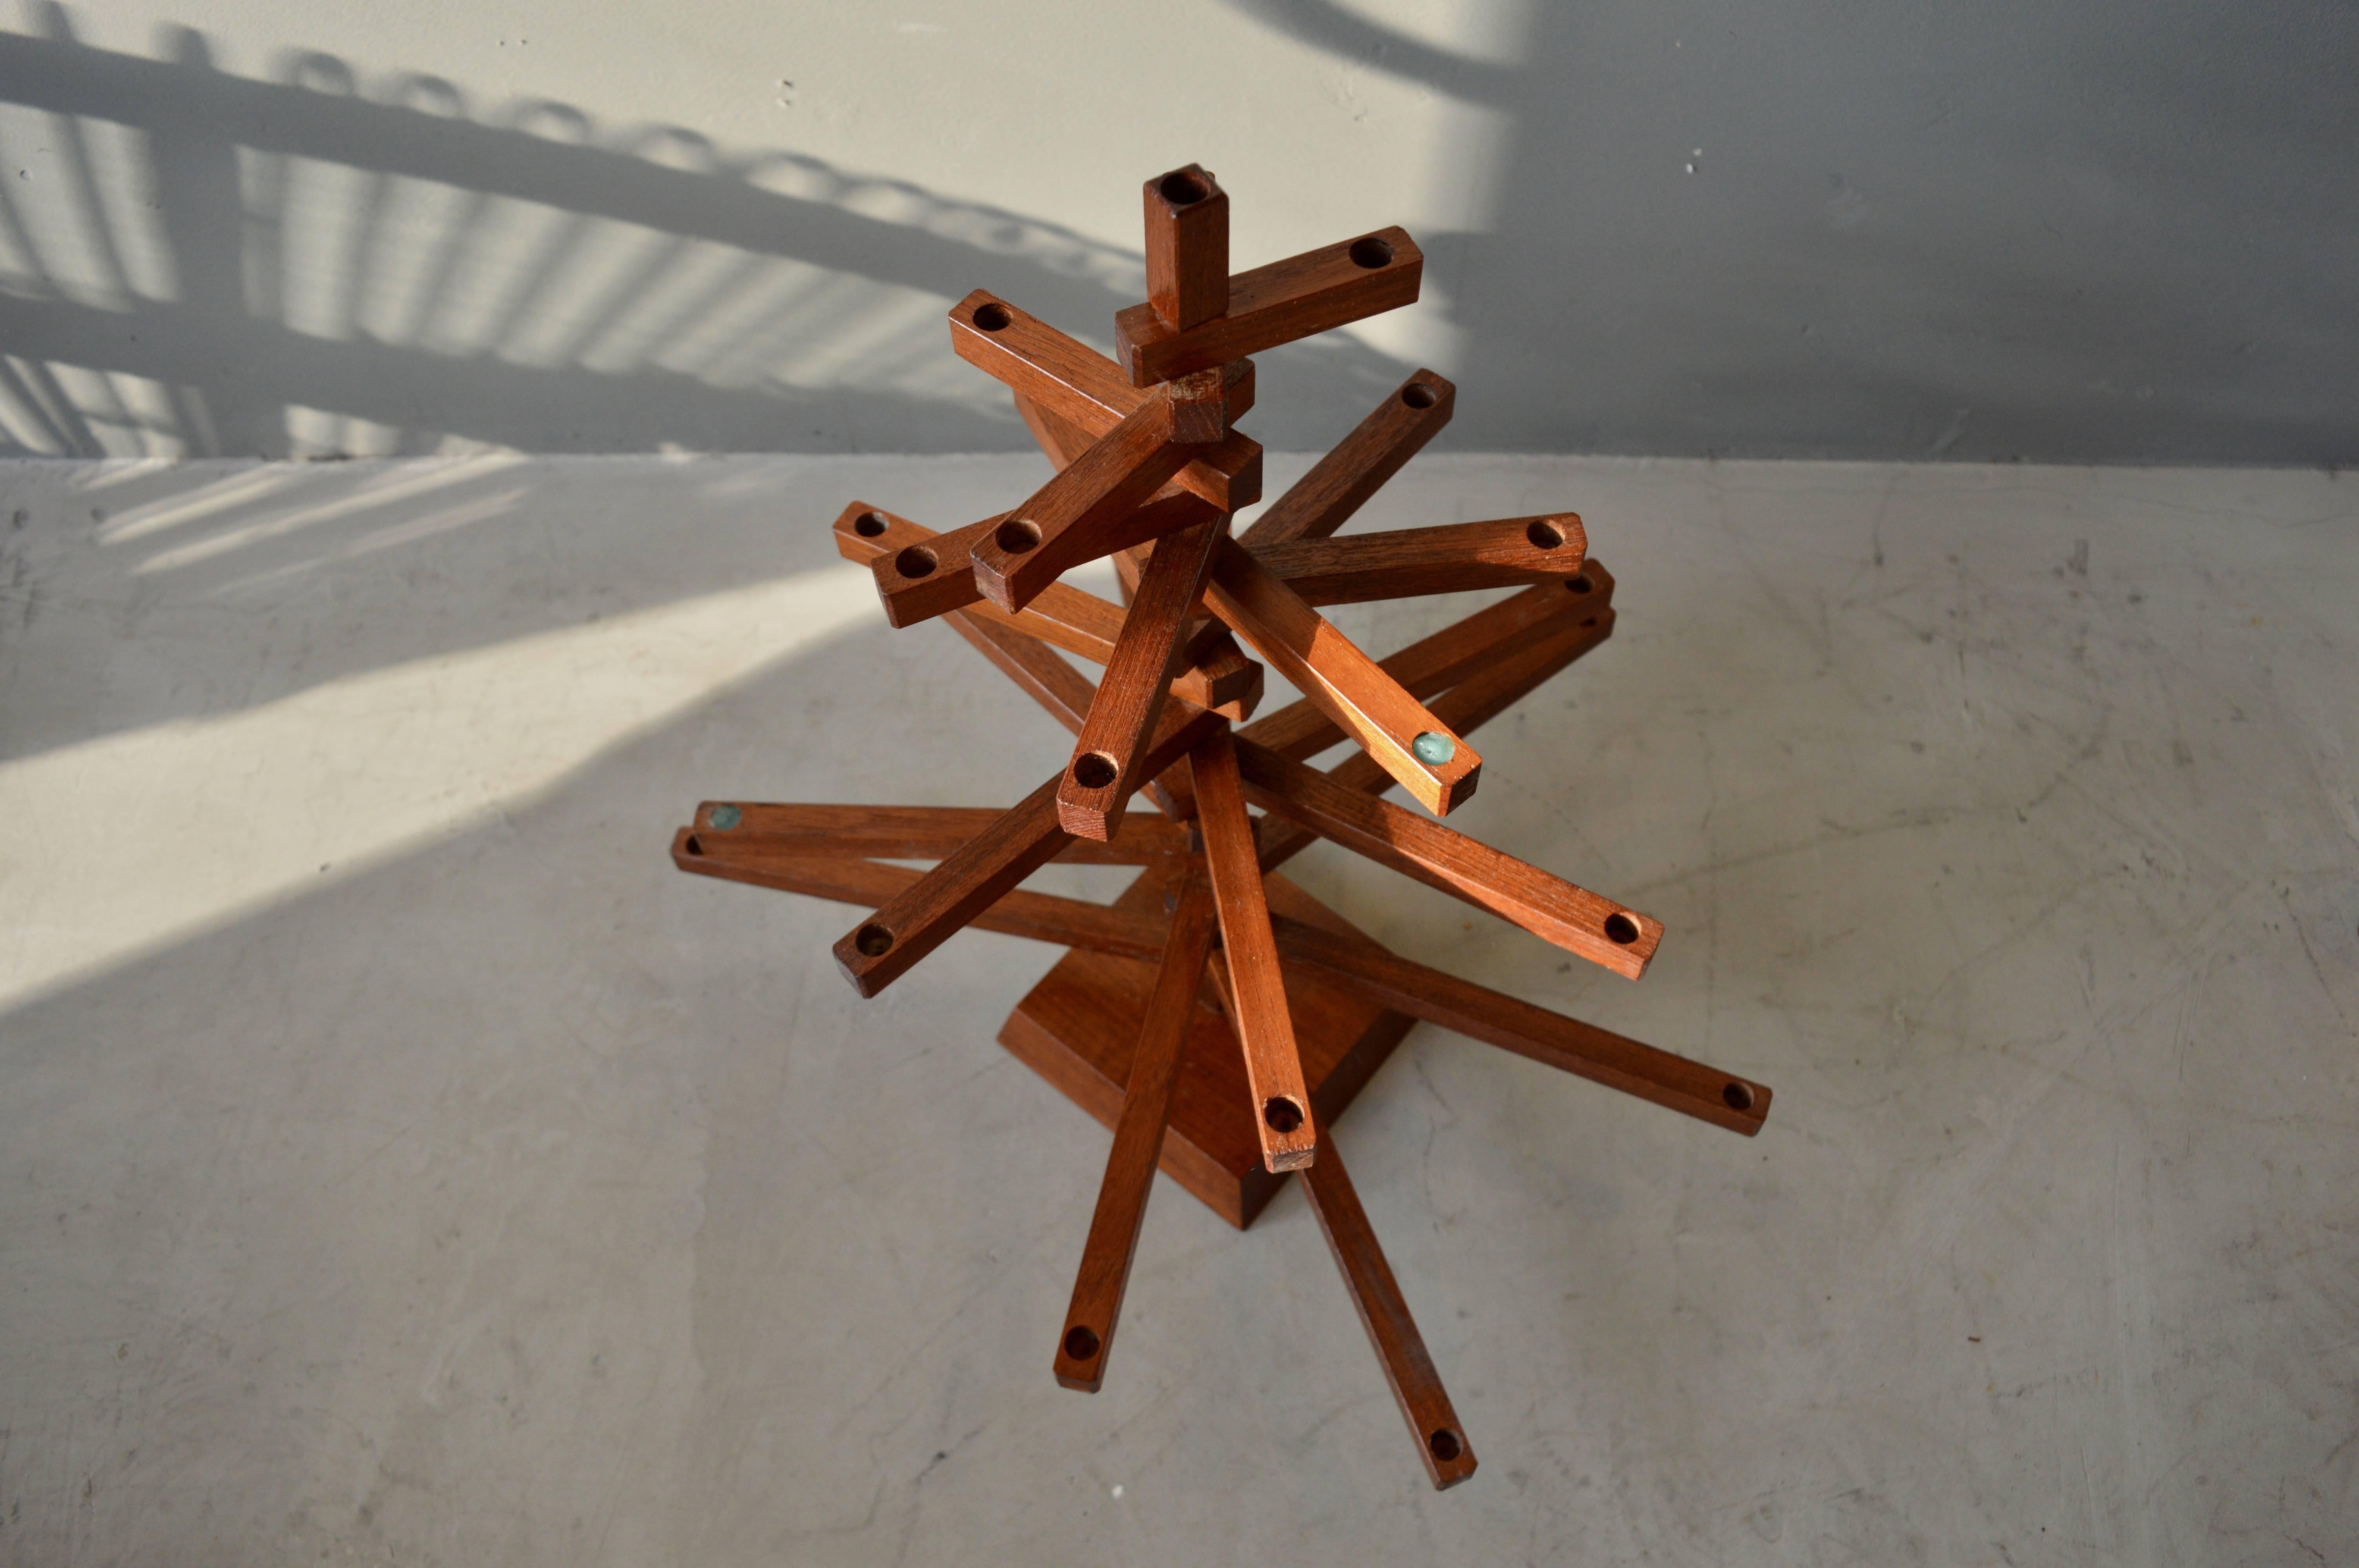 Very unique wood candelabra from Japan. Each arm rotates 360 degrees. 22 arms. 23 places to place a candle. Great design. Excellent condition.